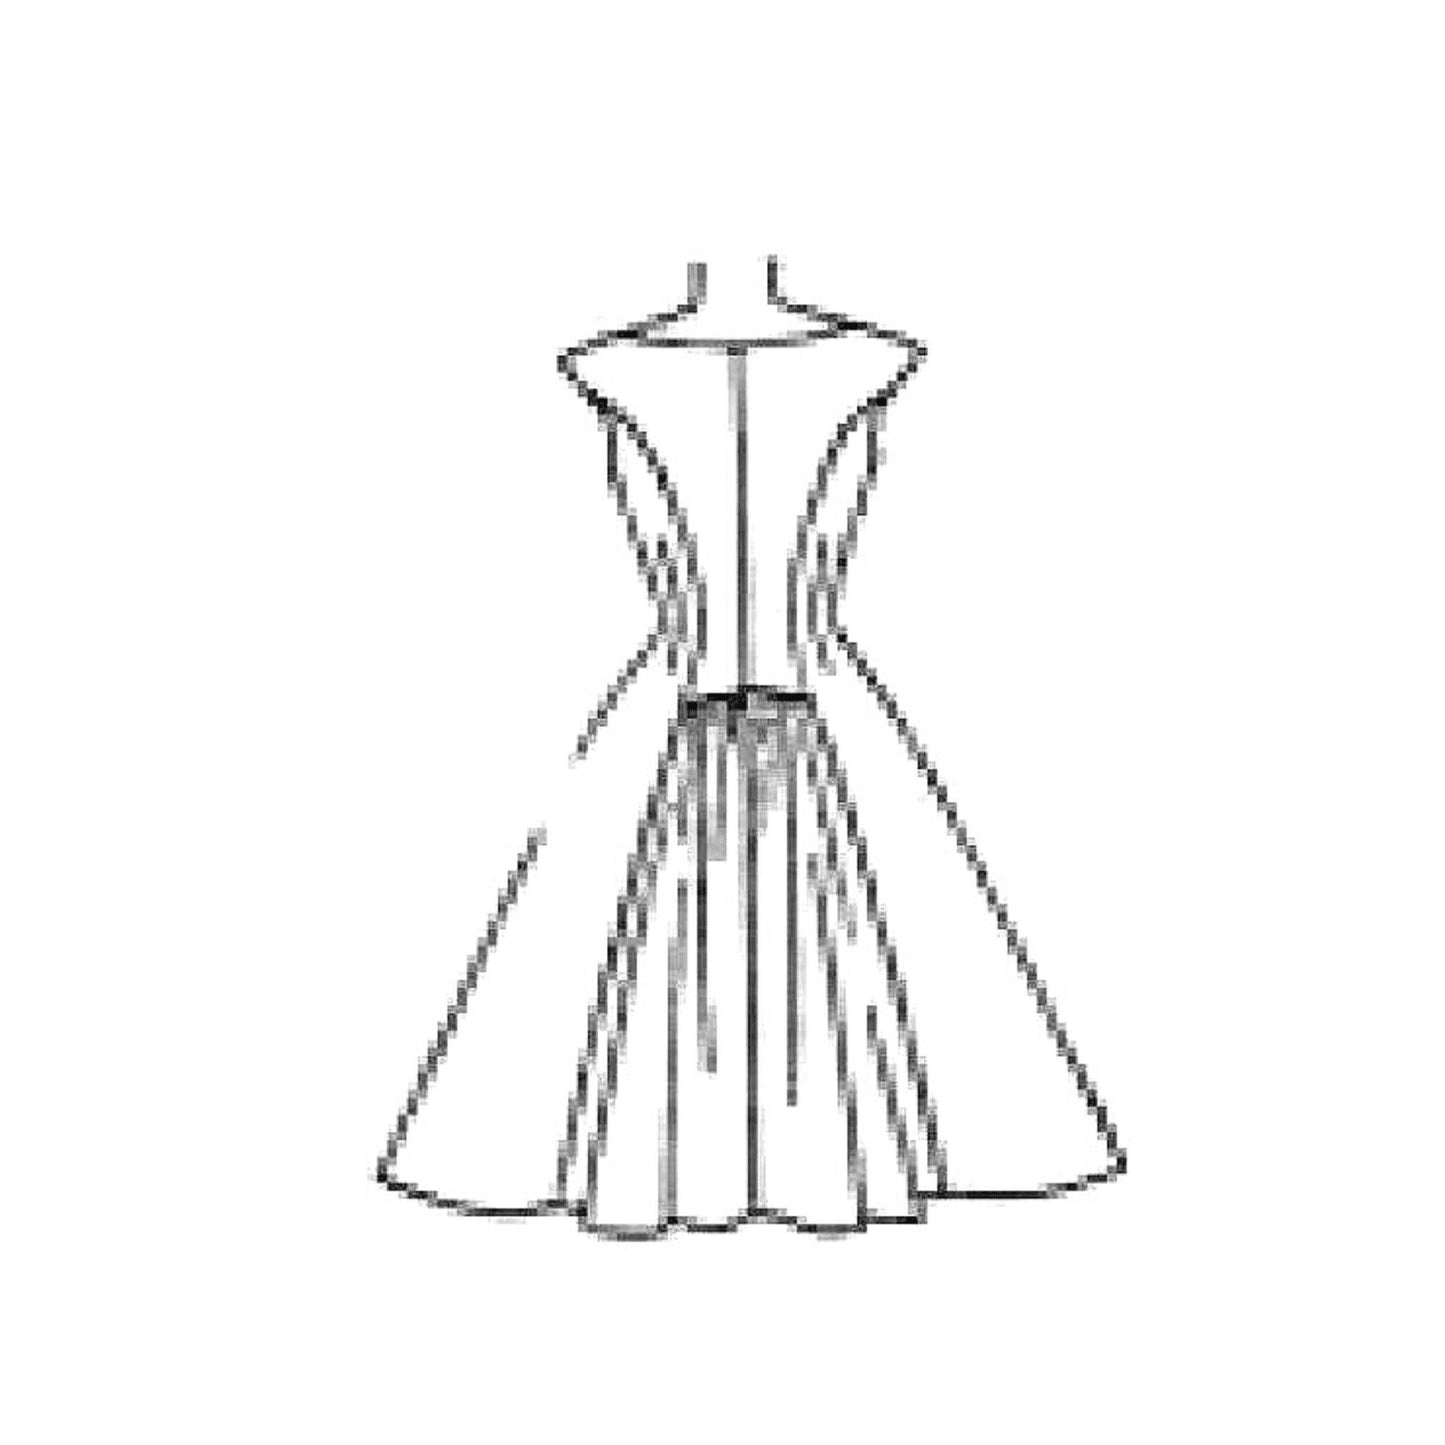 Line drawing of dress